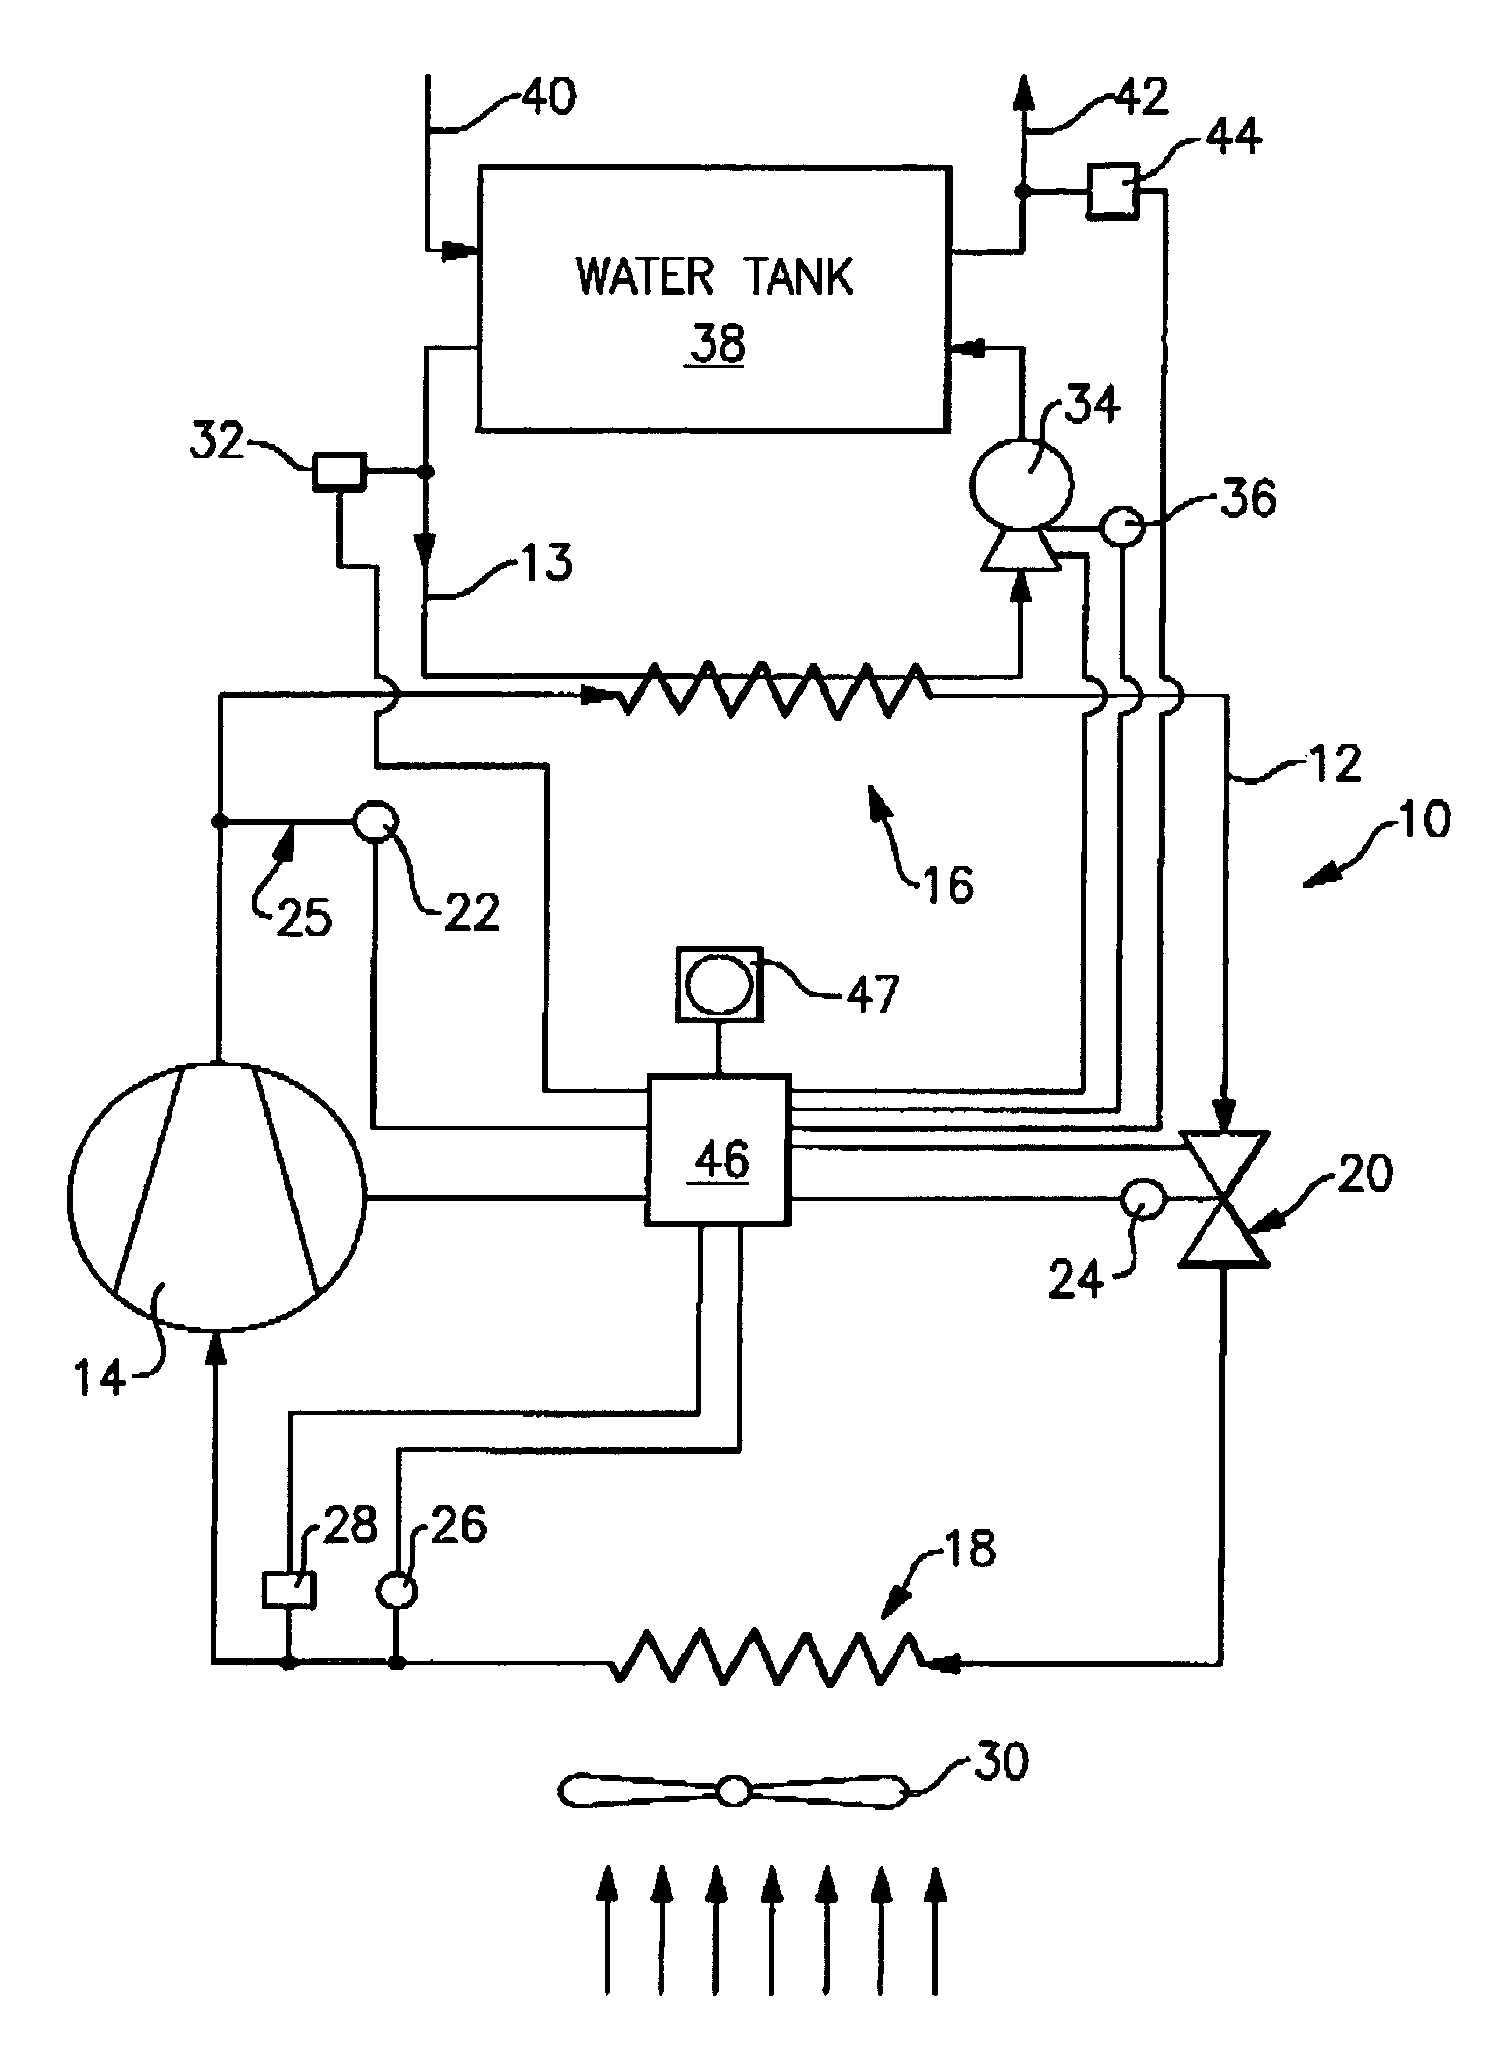 Method of controlling a carbon dioxide heat pump water heating system